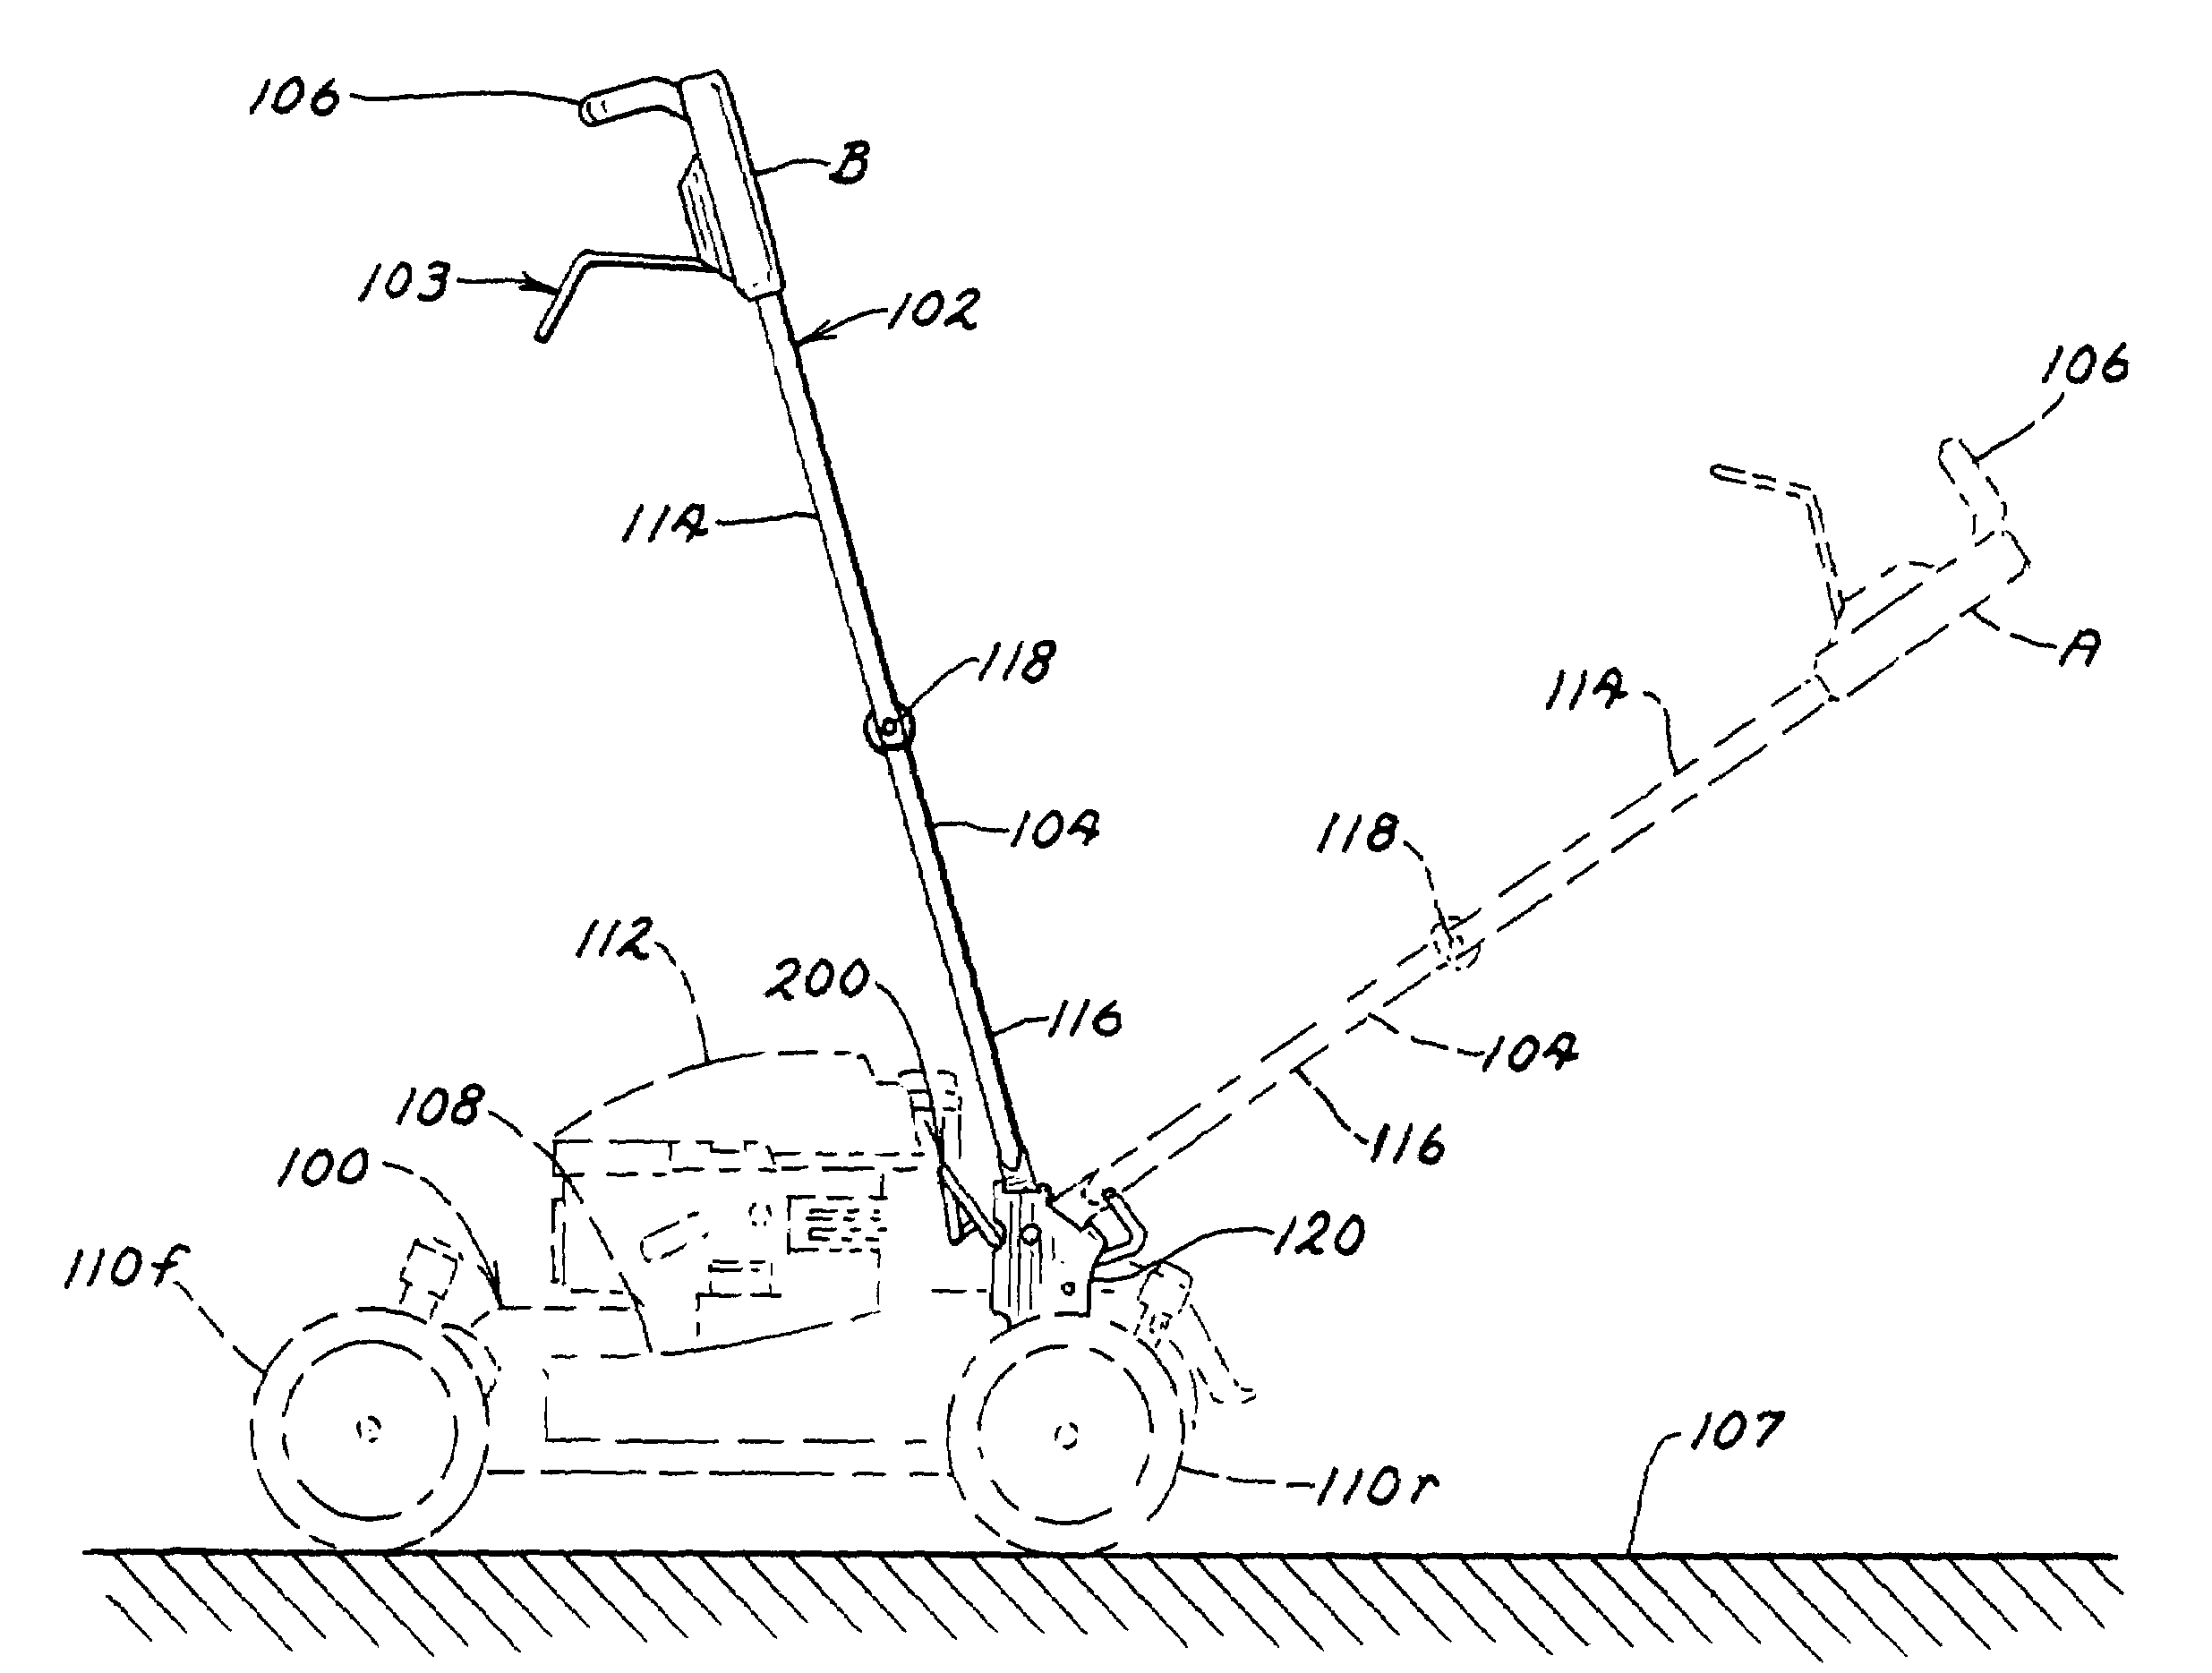 Walk-behind implement and handle assembly release apparatus for use with same